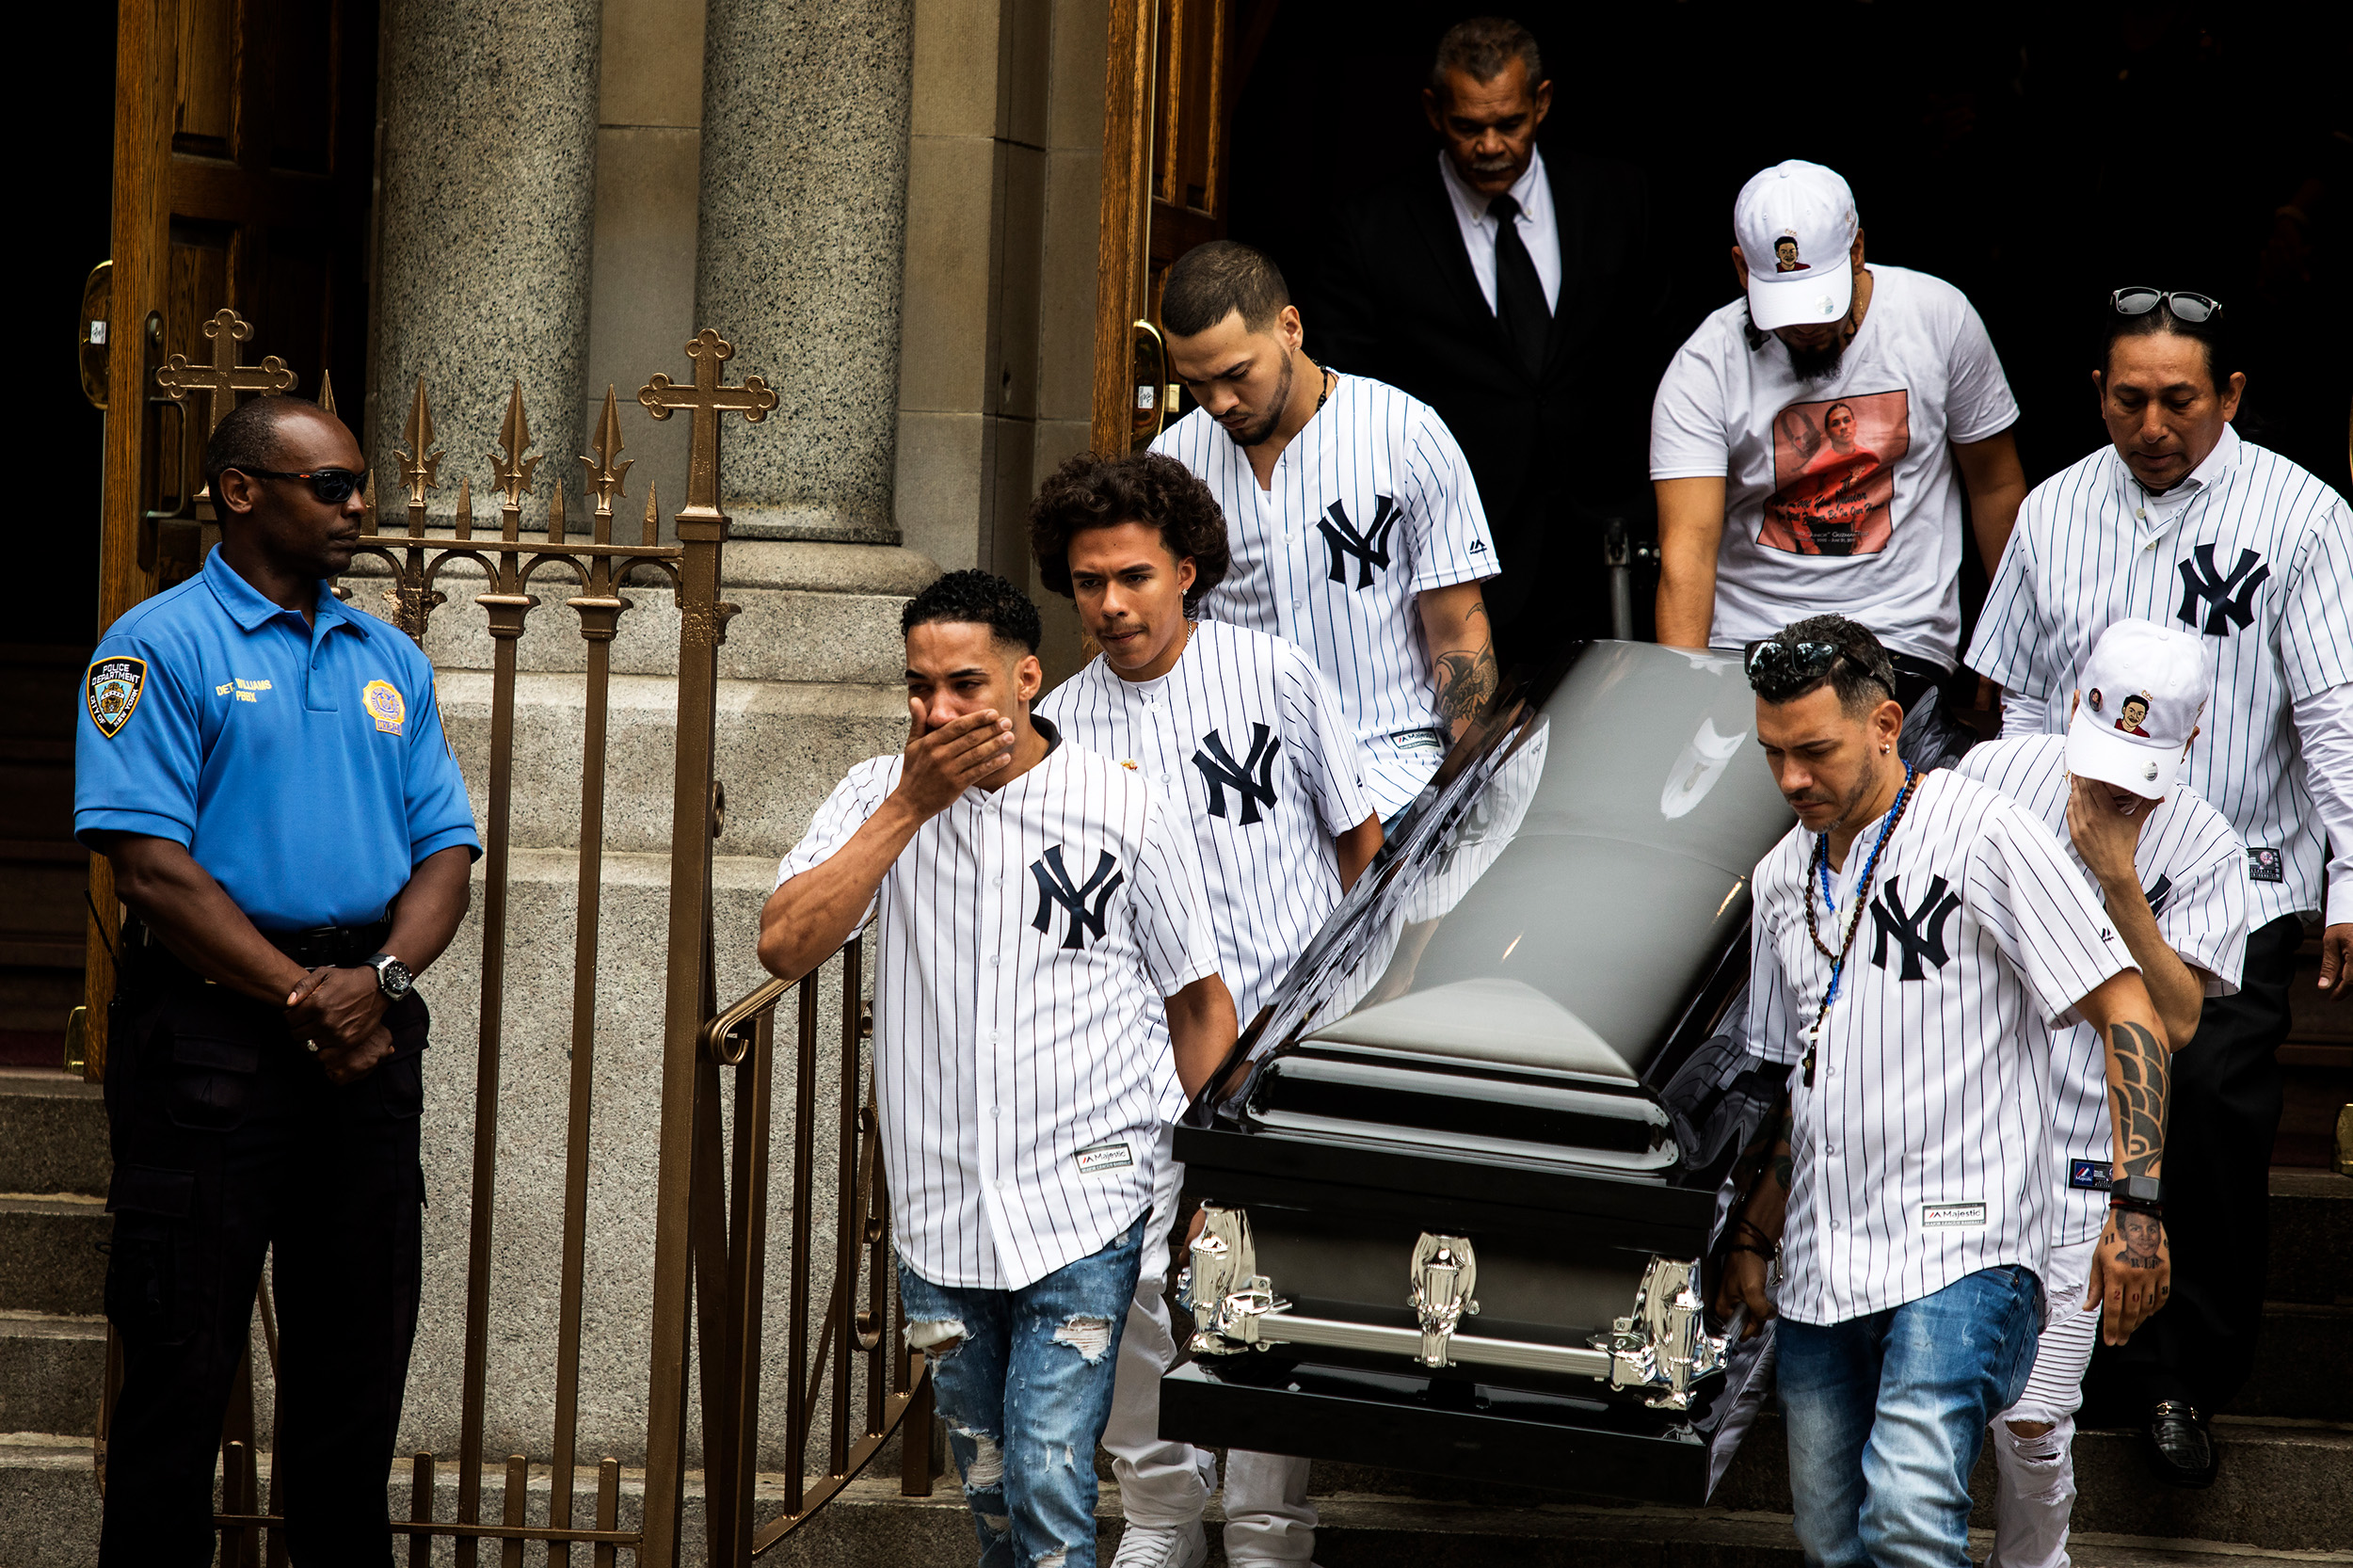  Mourners leaving Our Lady of Mount Carmel in the Bronx on Wednesday at the funeral of Lesandro Guzman-Feliz, who the police said was killed by gang members last week outside a bodega. 